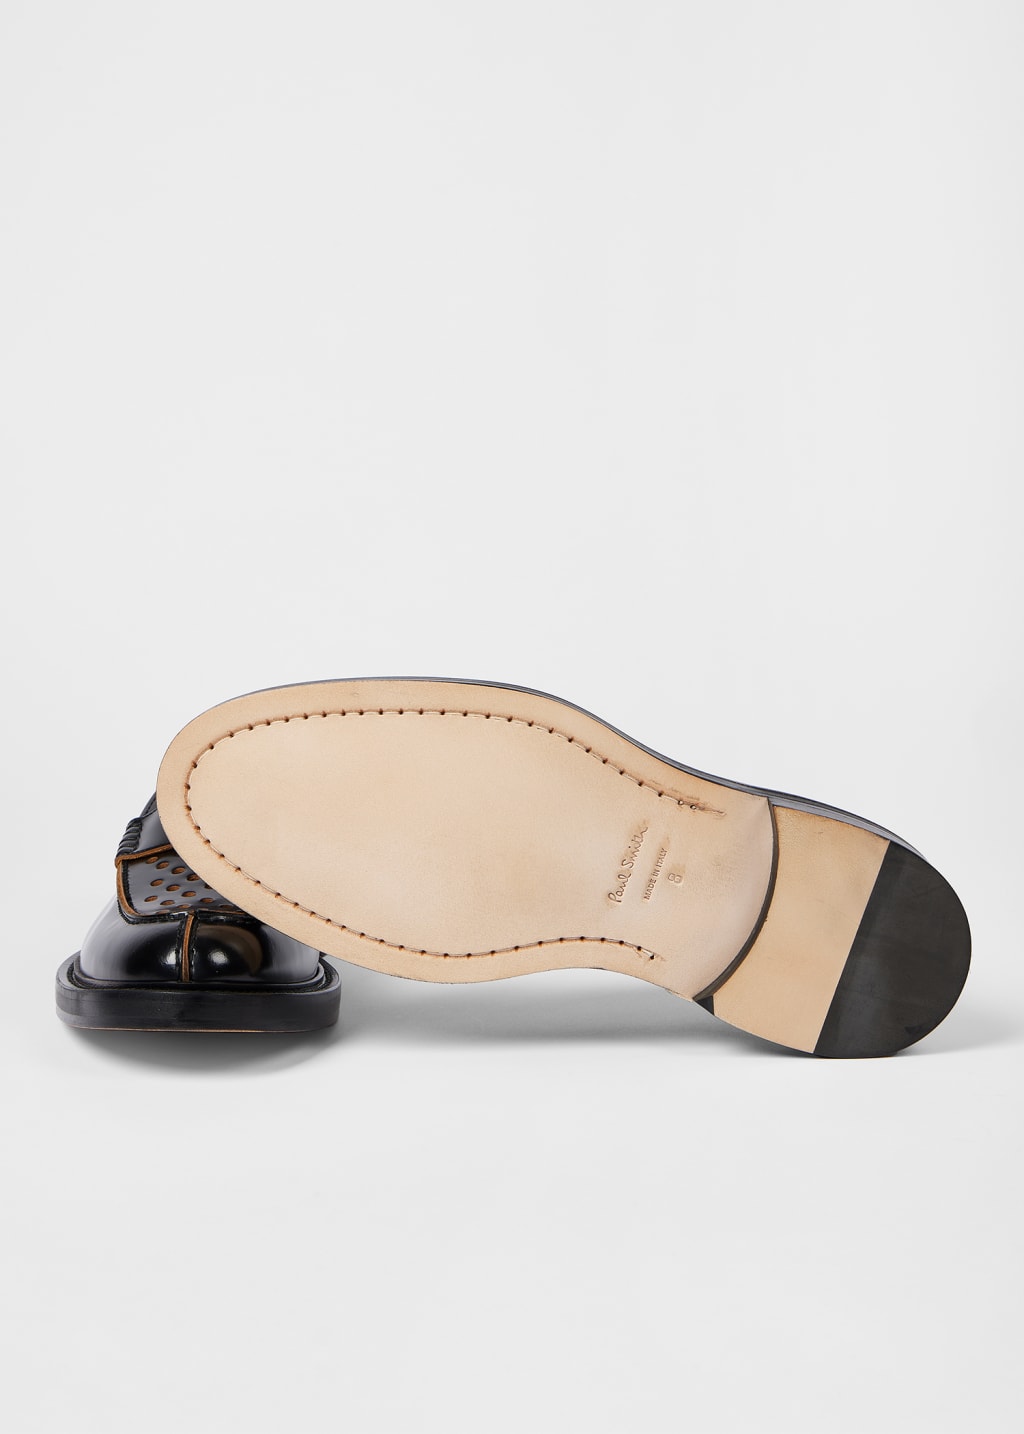 Product view - Black Leather 'Rossini' Loafers